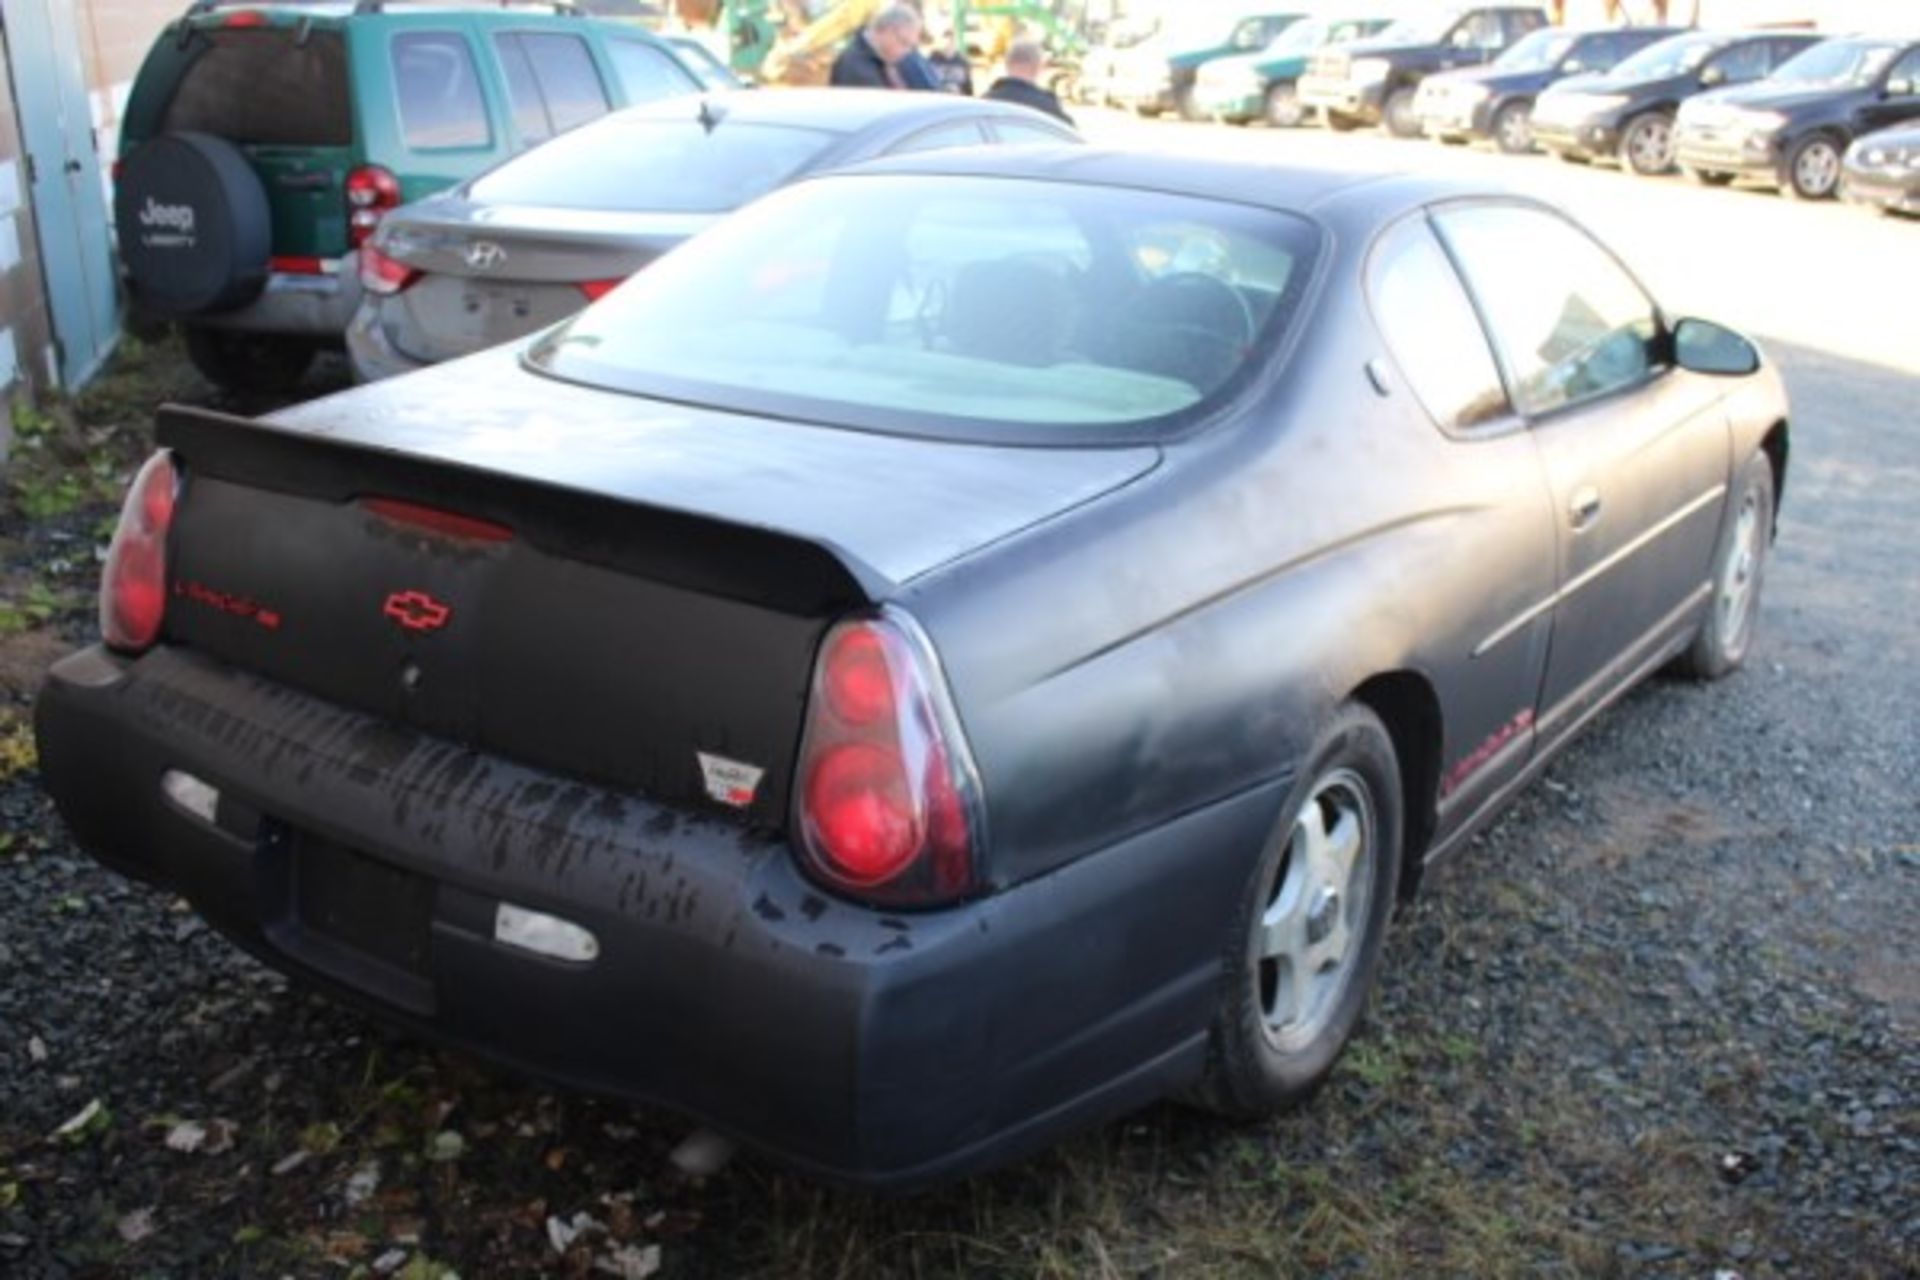 2001 Monte Carlo SS - Image 4 of 6